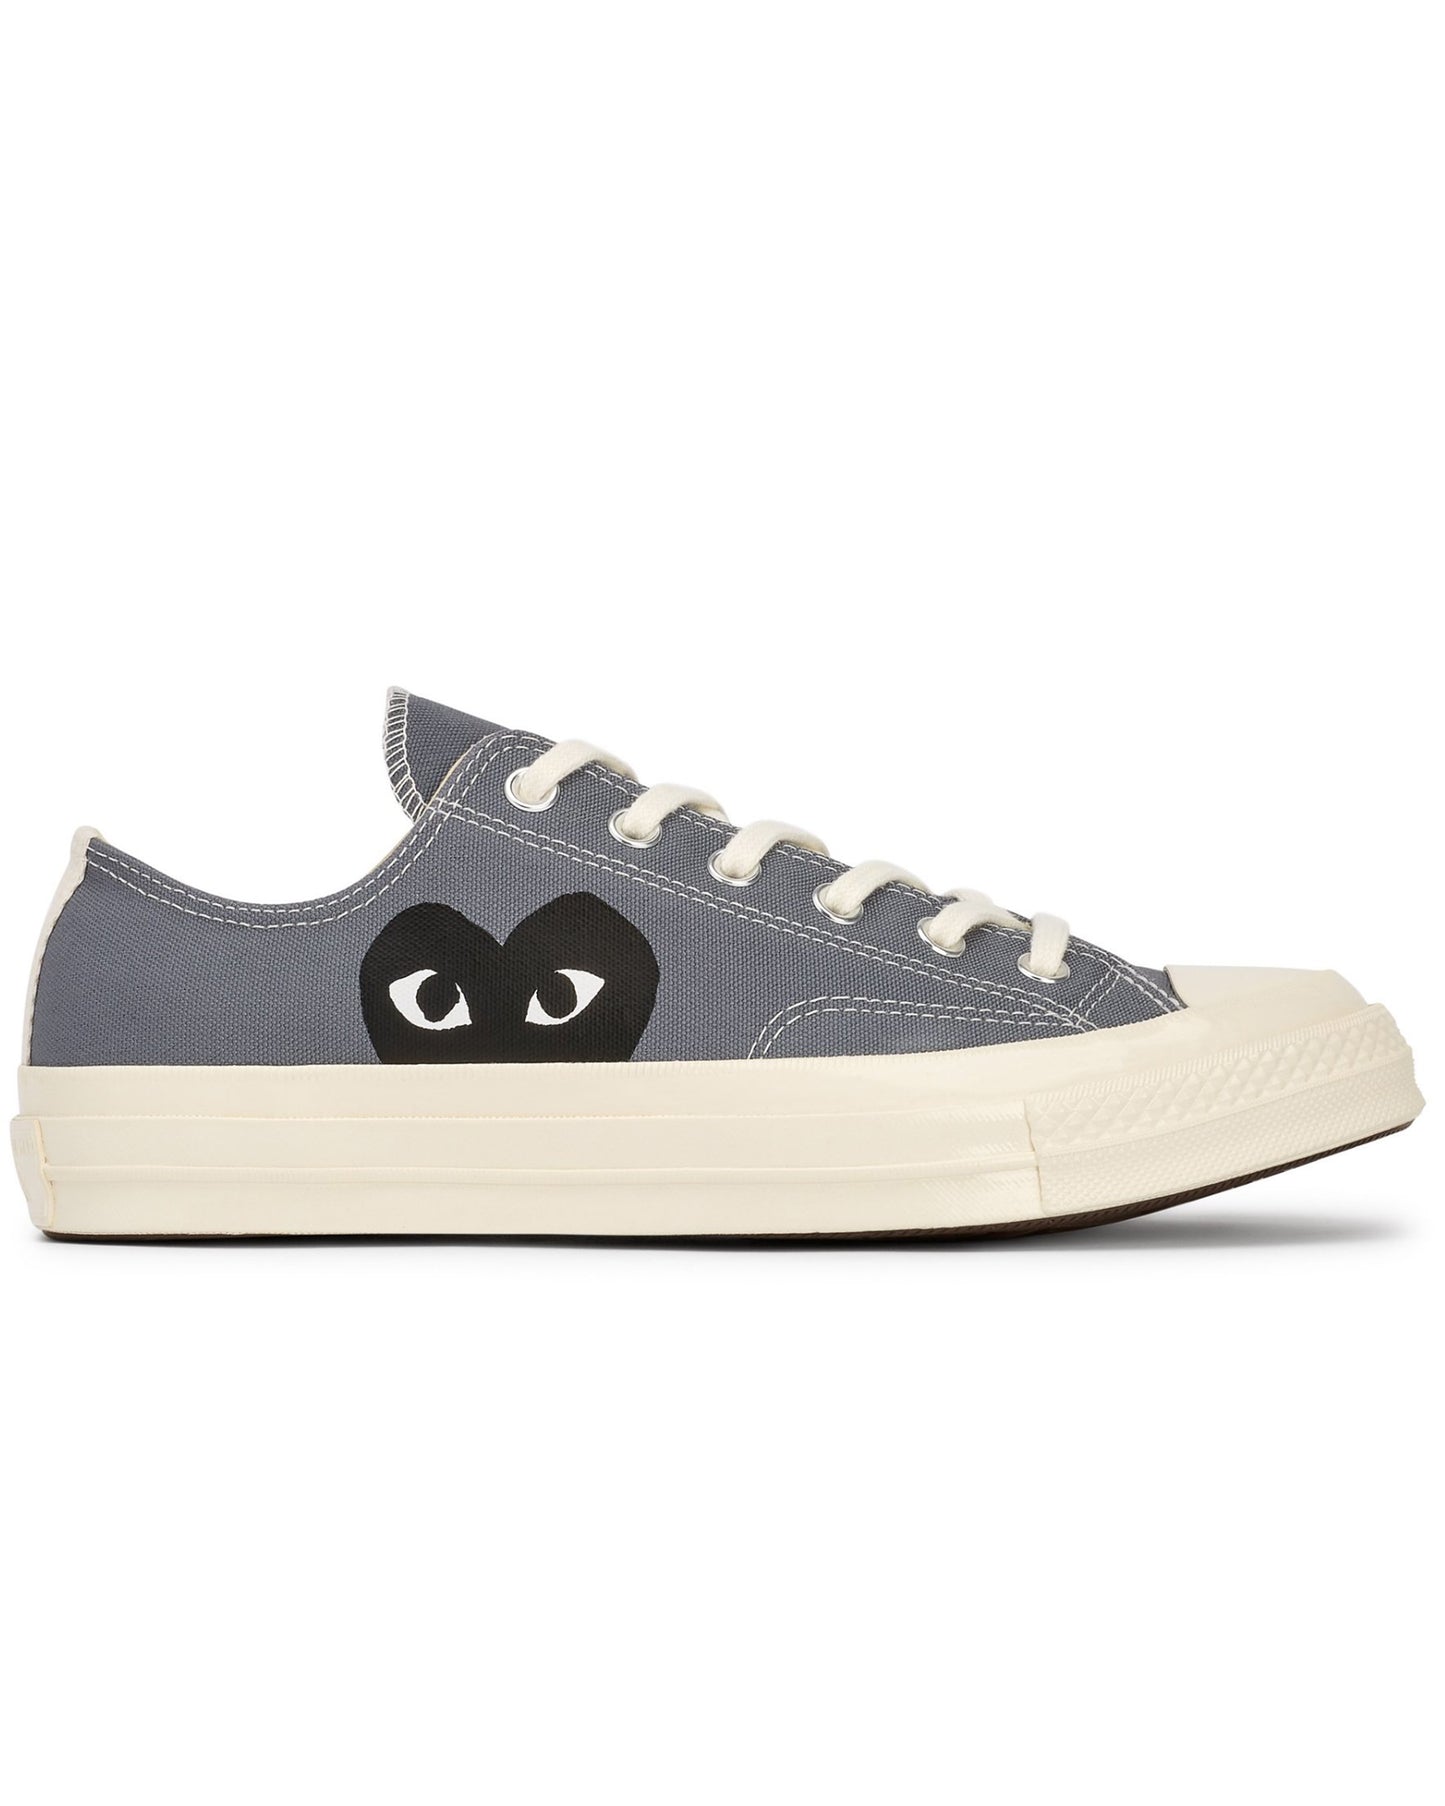 Comme Des Garcons Play Converse Chuck 70 Ox Grey | STASHED